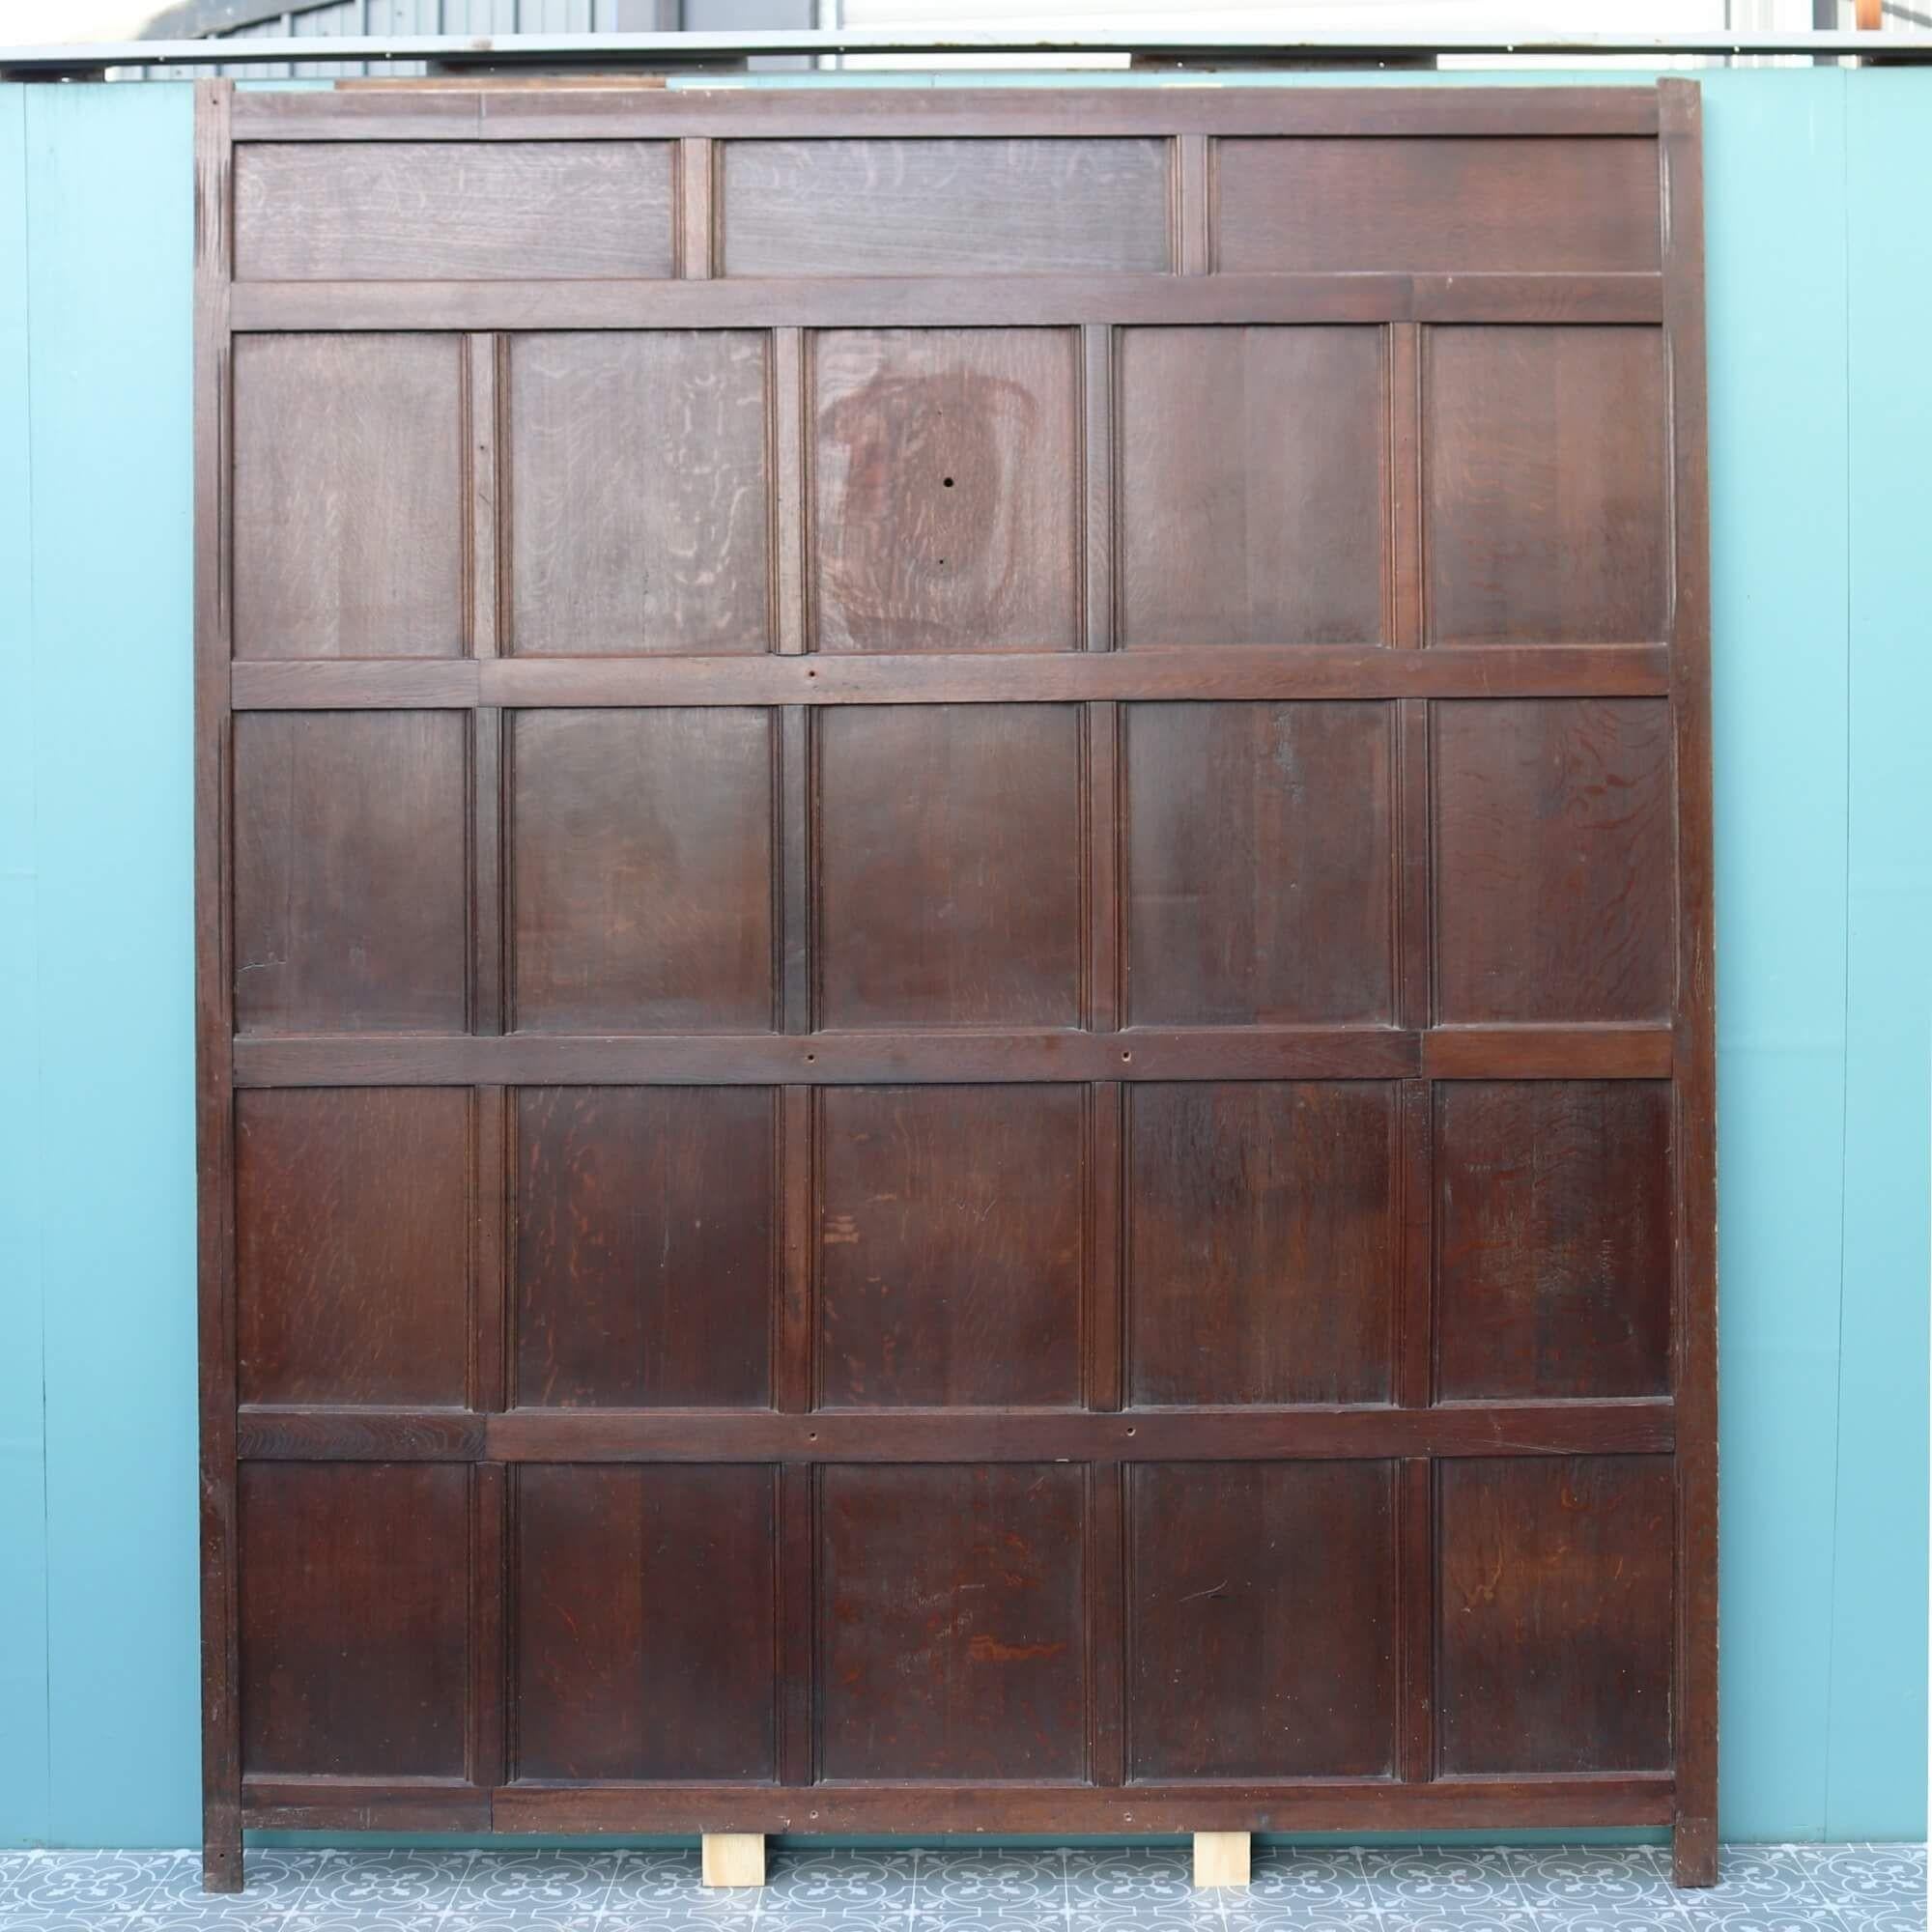 A long run of early 20th century reclaimed oak panelling plus a few spare parts with a dark oak finish.

This set of antique wall panelling comprises of 8 tall panels of varying widths (see below for detailed dimensions) plus a few spare parts for